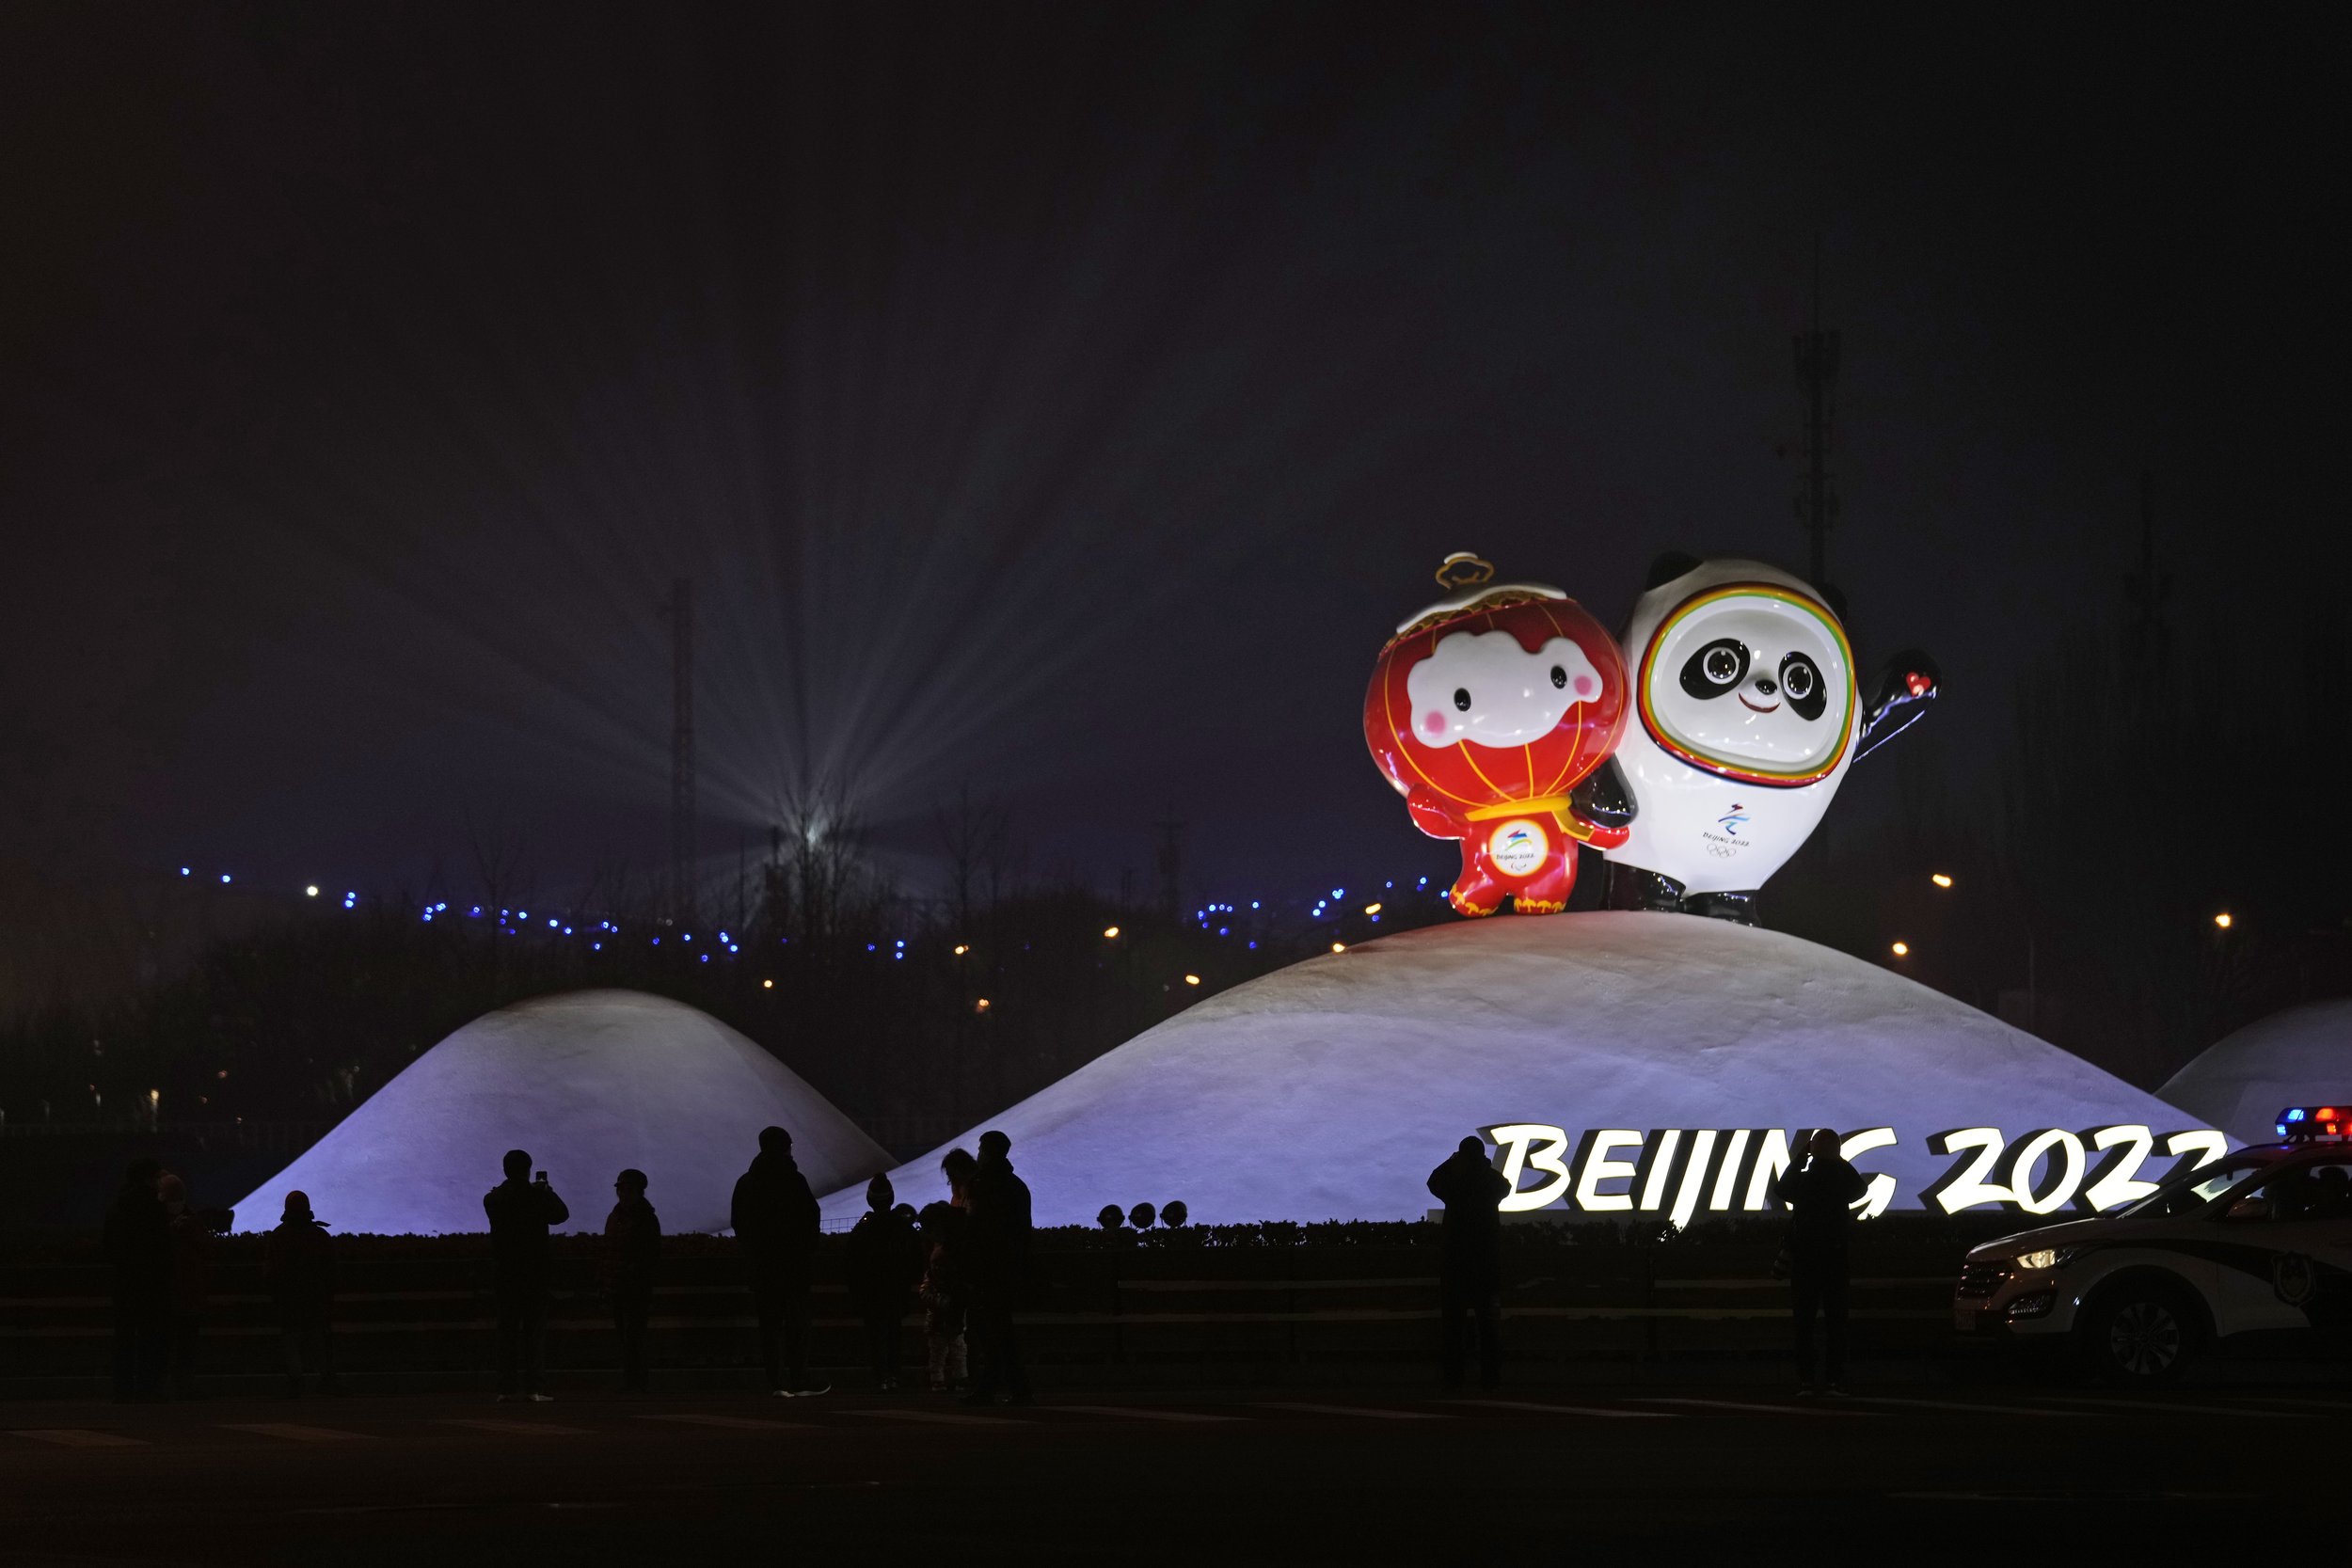  Residents past near the Paralympic mascot Shuey Rhon Rhon left, and Winter Olympic mascot Bing Dwen Dwen displayed near the National Stadium where a rehearsal for the opening ceremony of the 2022 Winter Olympics is taking place, in Beijing, China, J